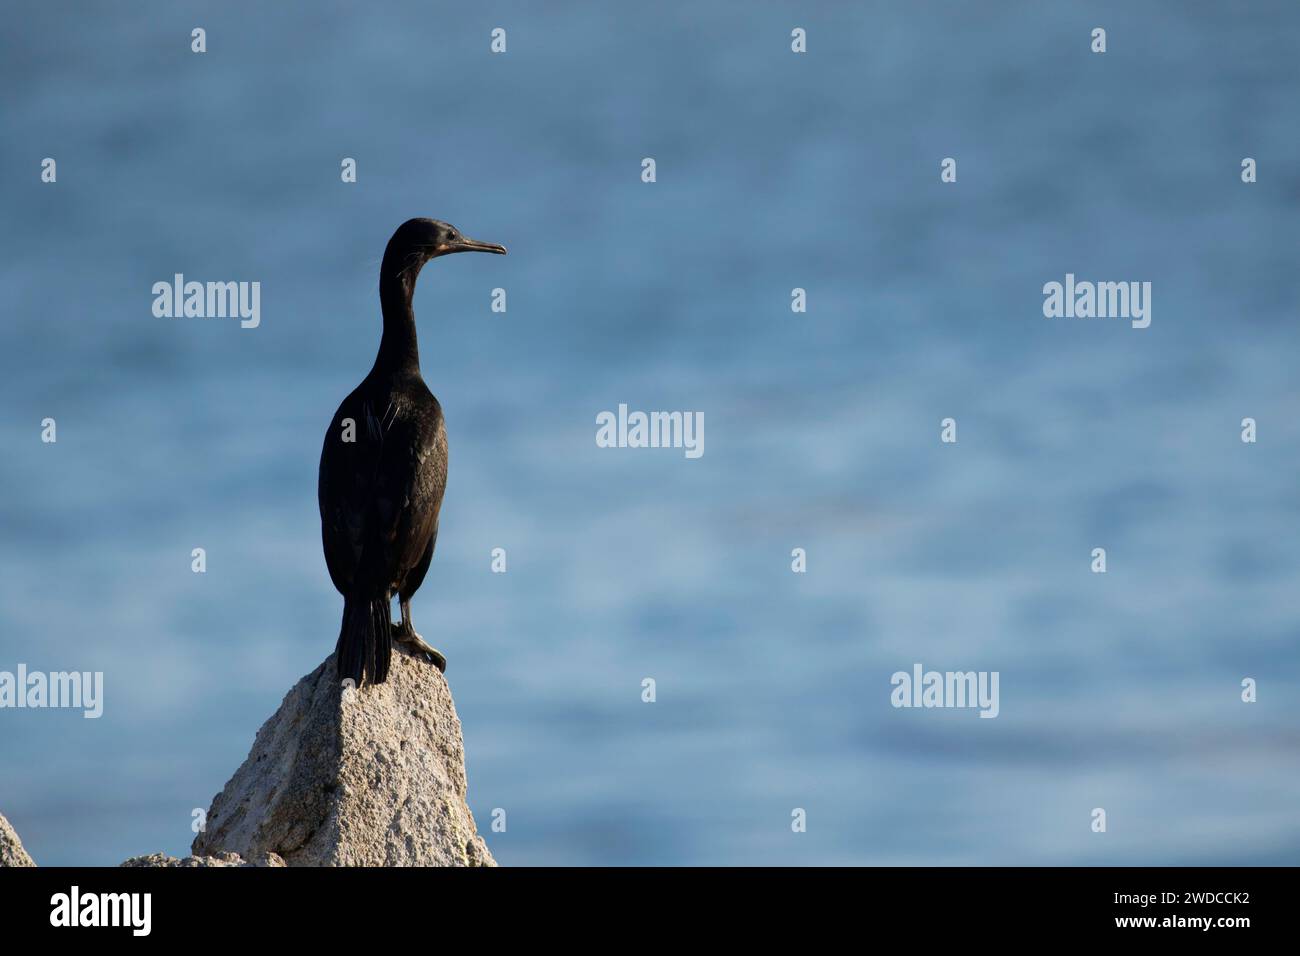 Cormorant, Point Lobos State Reserve, Big Sur Coast Highway Scenic Byway, California Stock Photo